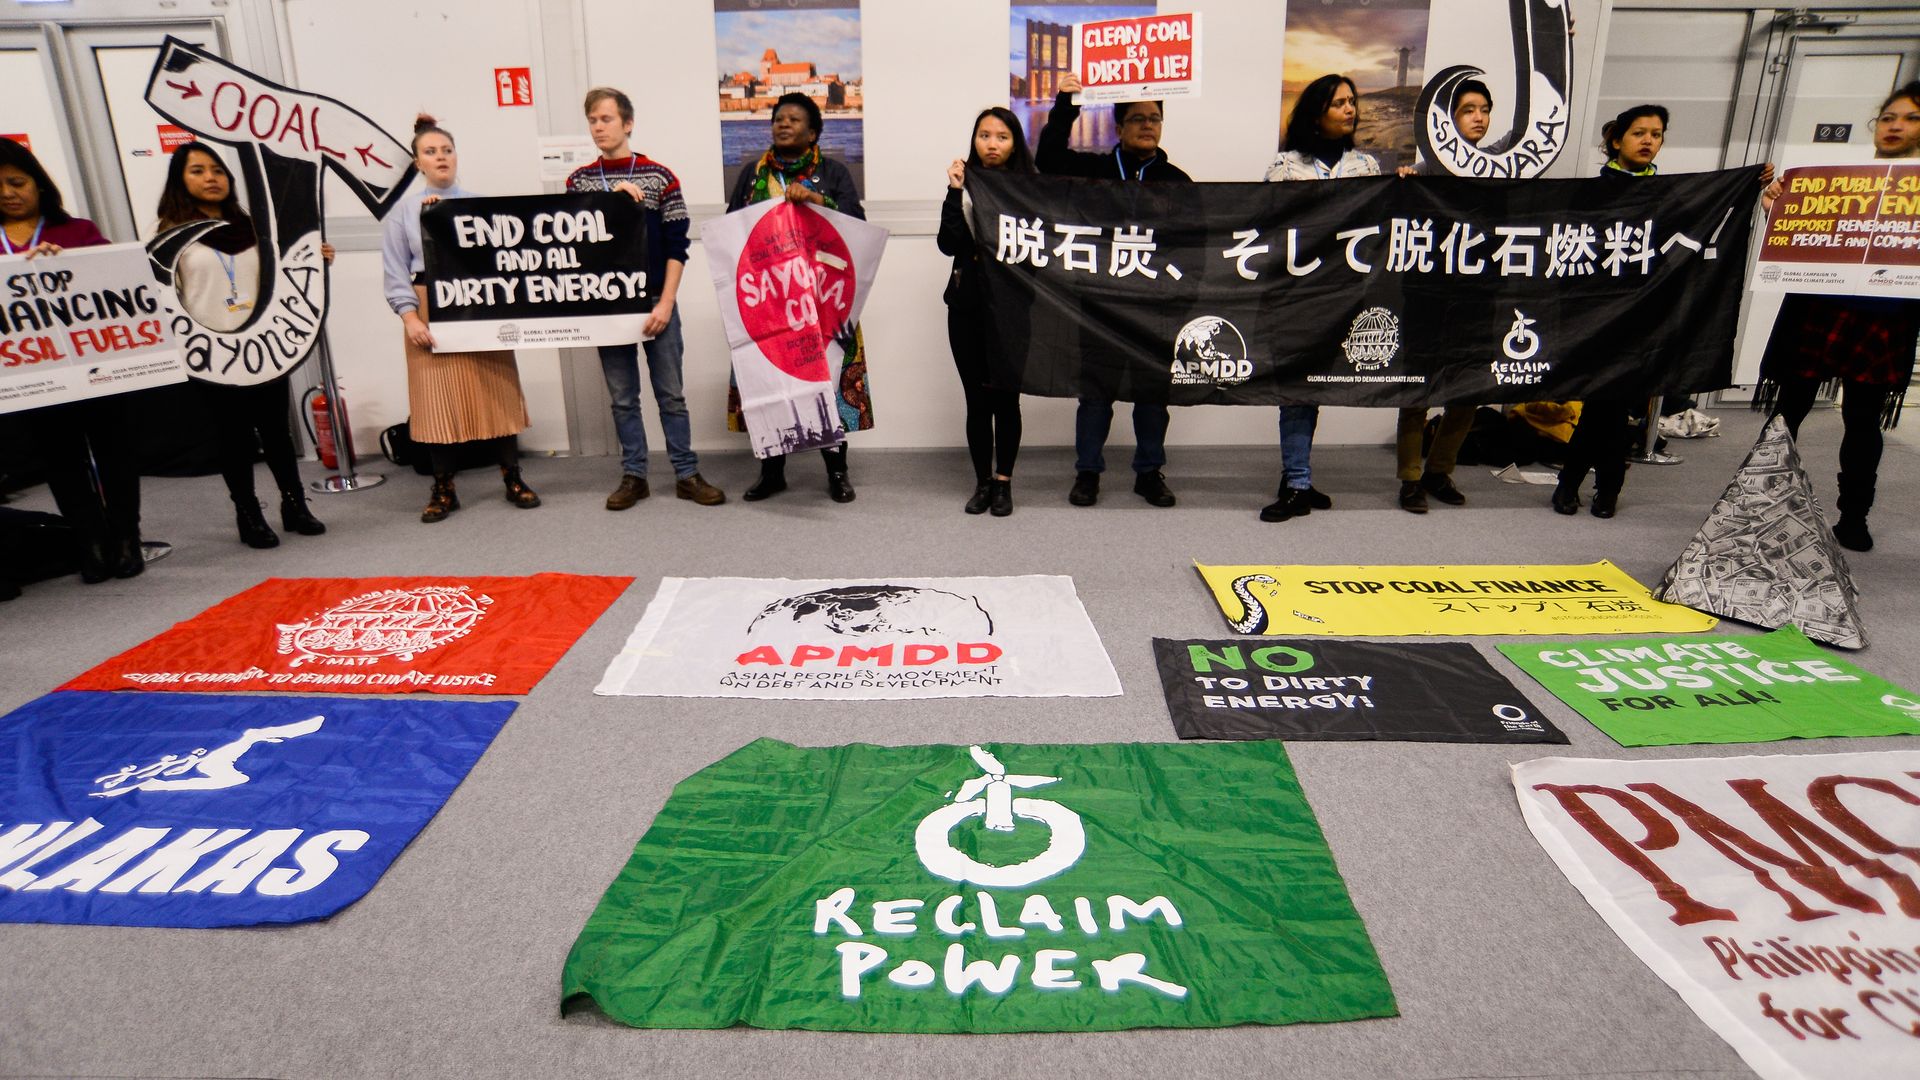 Protestors highlight the divide at a global climate conference around fossil fuels.